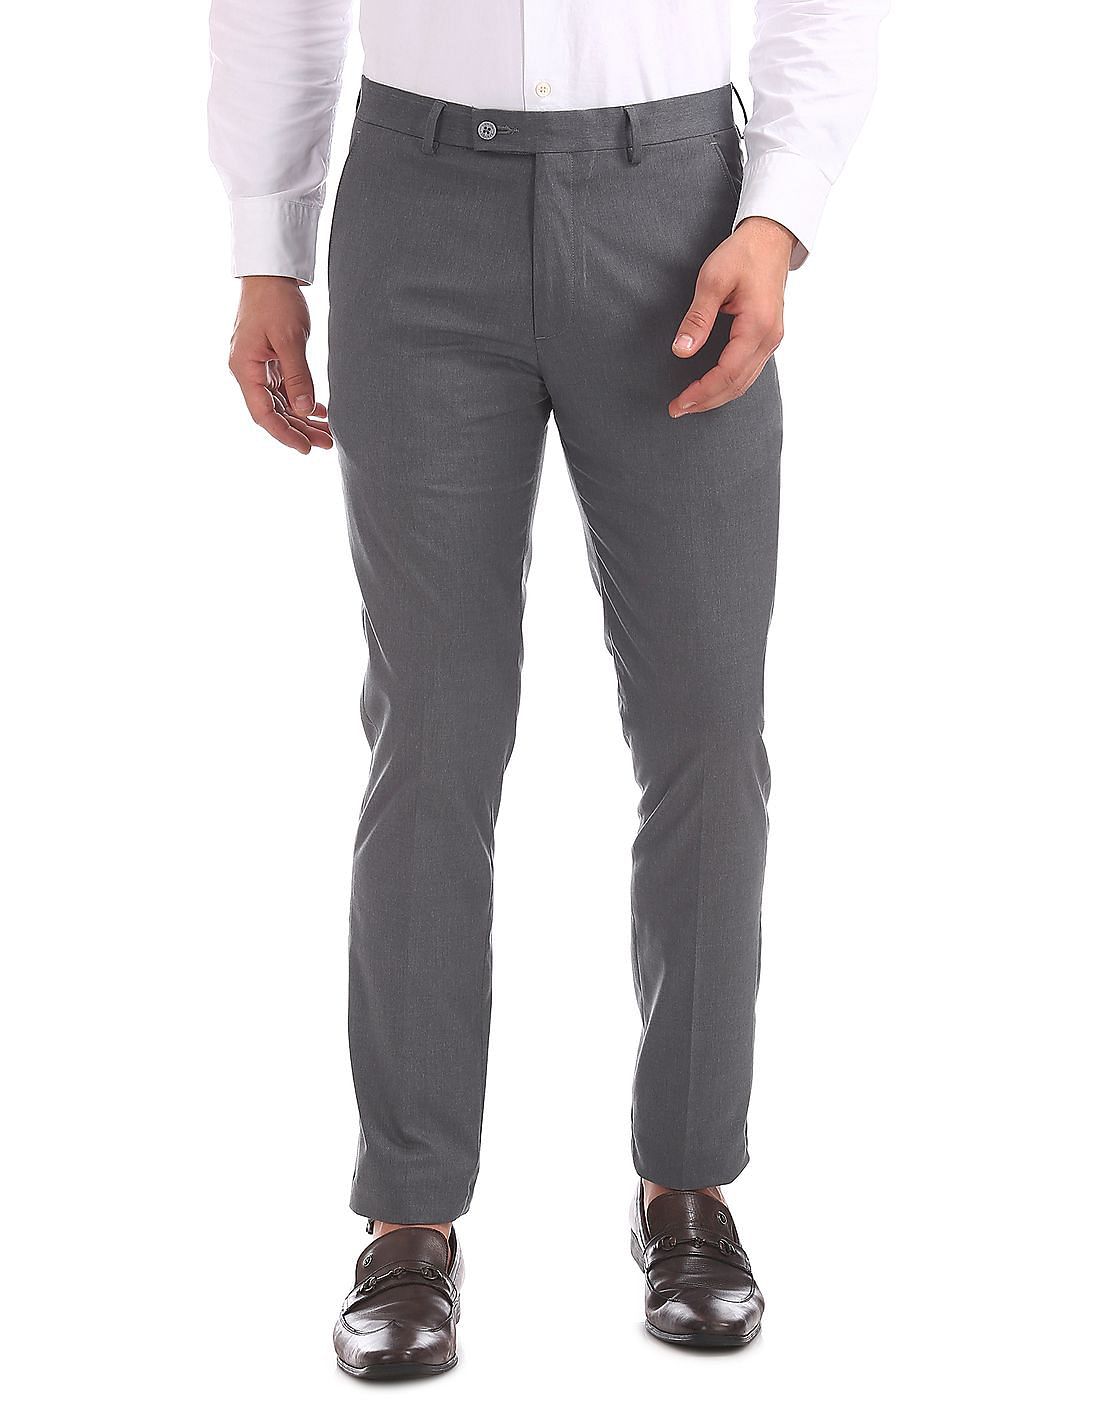 Buy Men Flat Front Super Slim Fit Trousers online at NNNOW.com